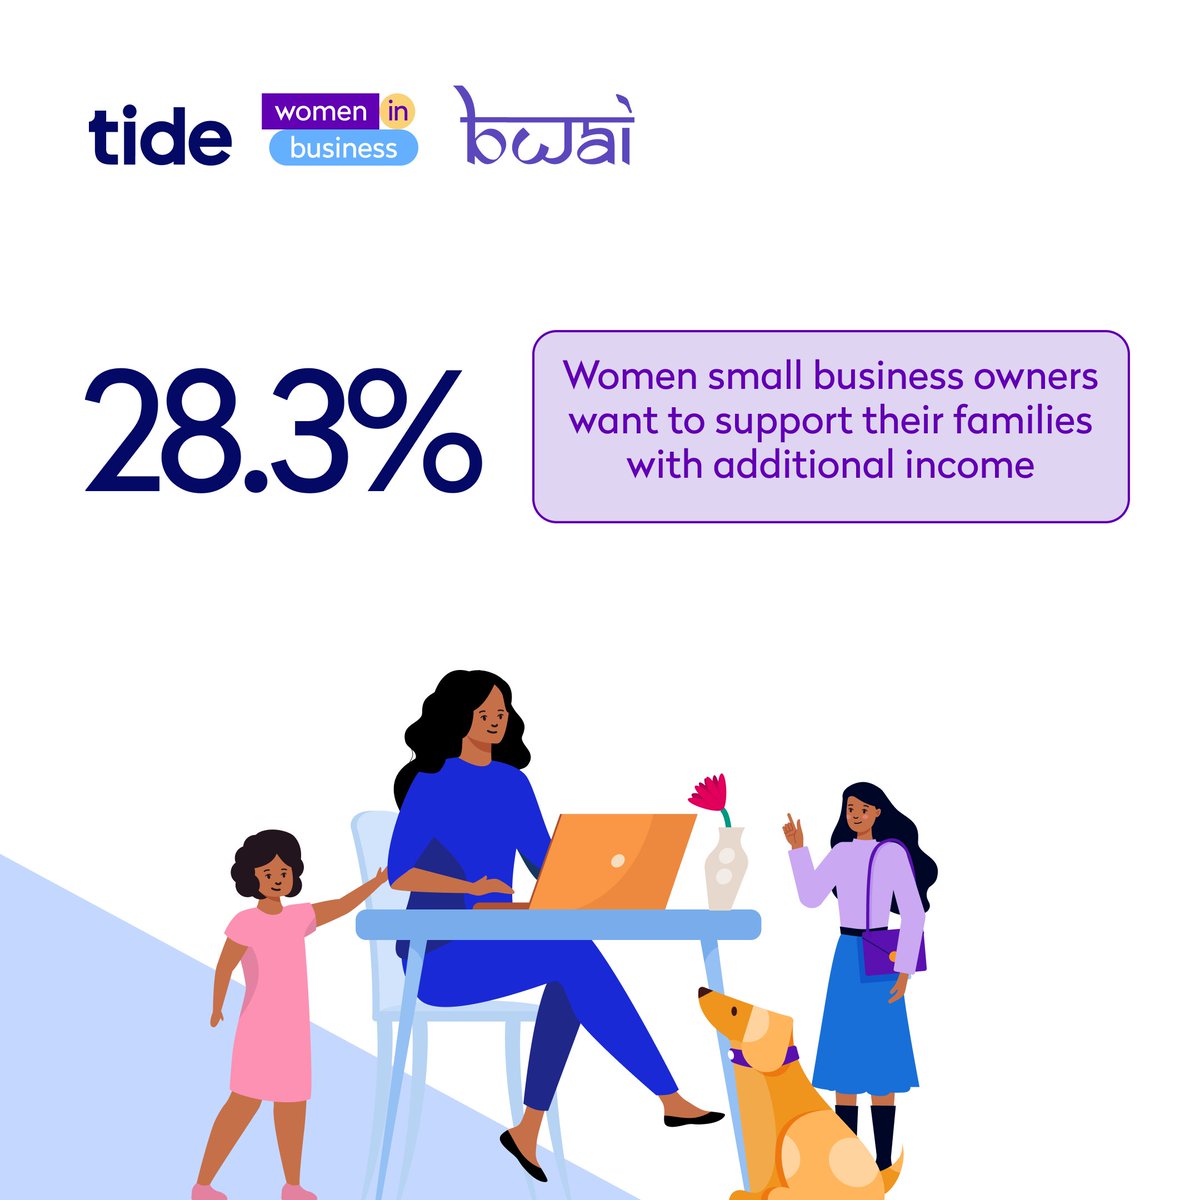 🇮🇳Dive into the dreams and hurdles of women entrepreneurs with our #BharatWomenAspirationIndex report. 

Check out #insights & stay tuned for more.

Access the full #BWAI report here 👉 bit.ly/4b83rfZ

#Tide #womeninbusiness #womenentrepreneurs #womenempowerment